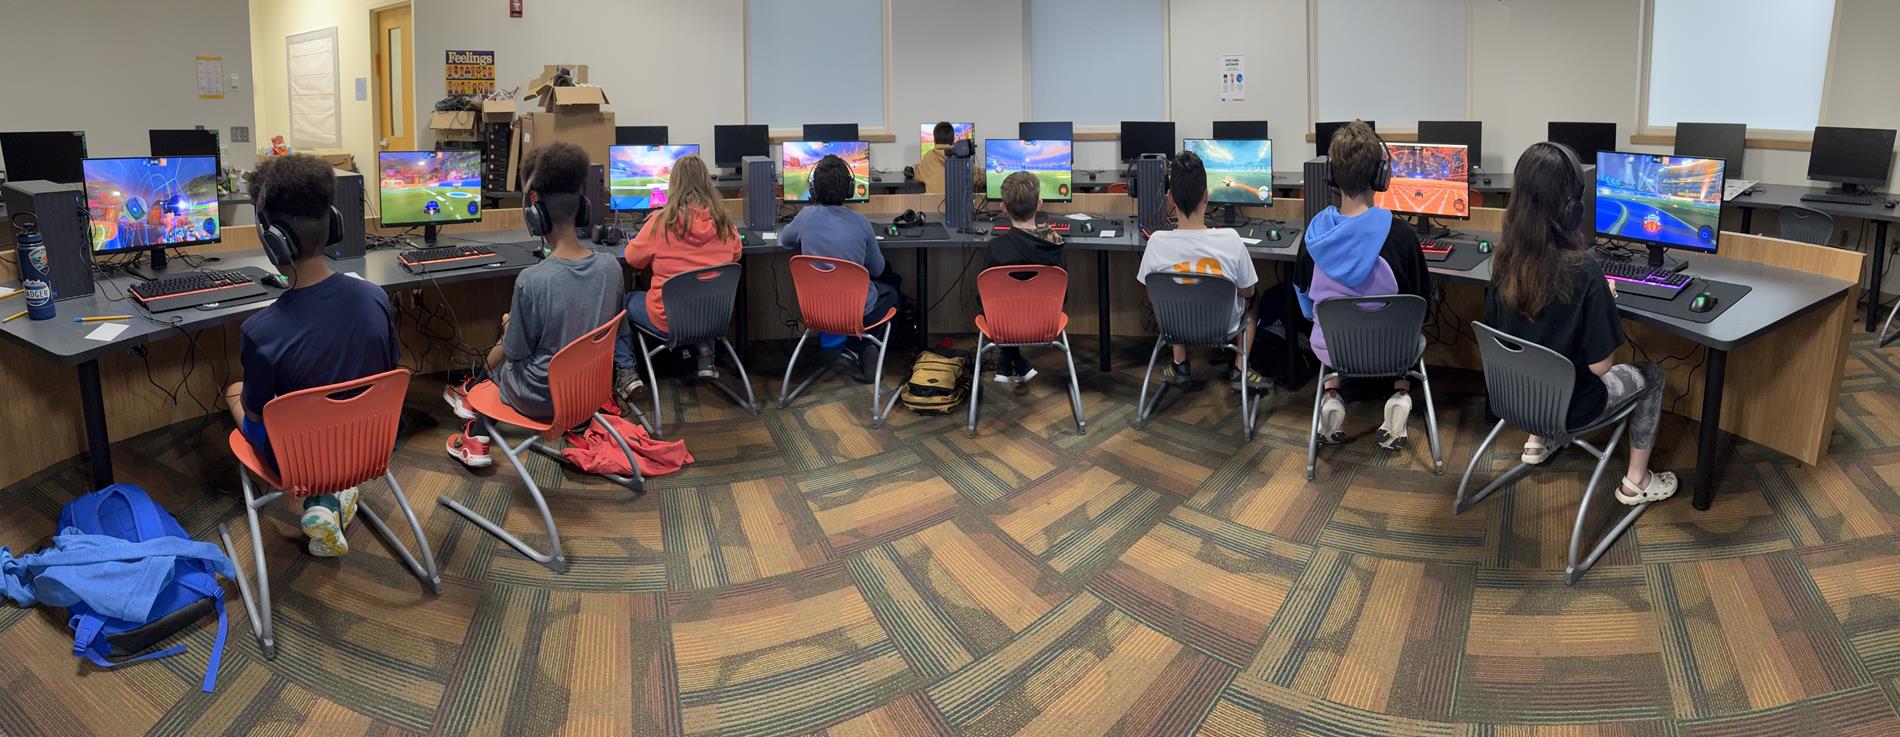 eSports Lab - Students using devices.